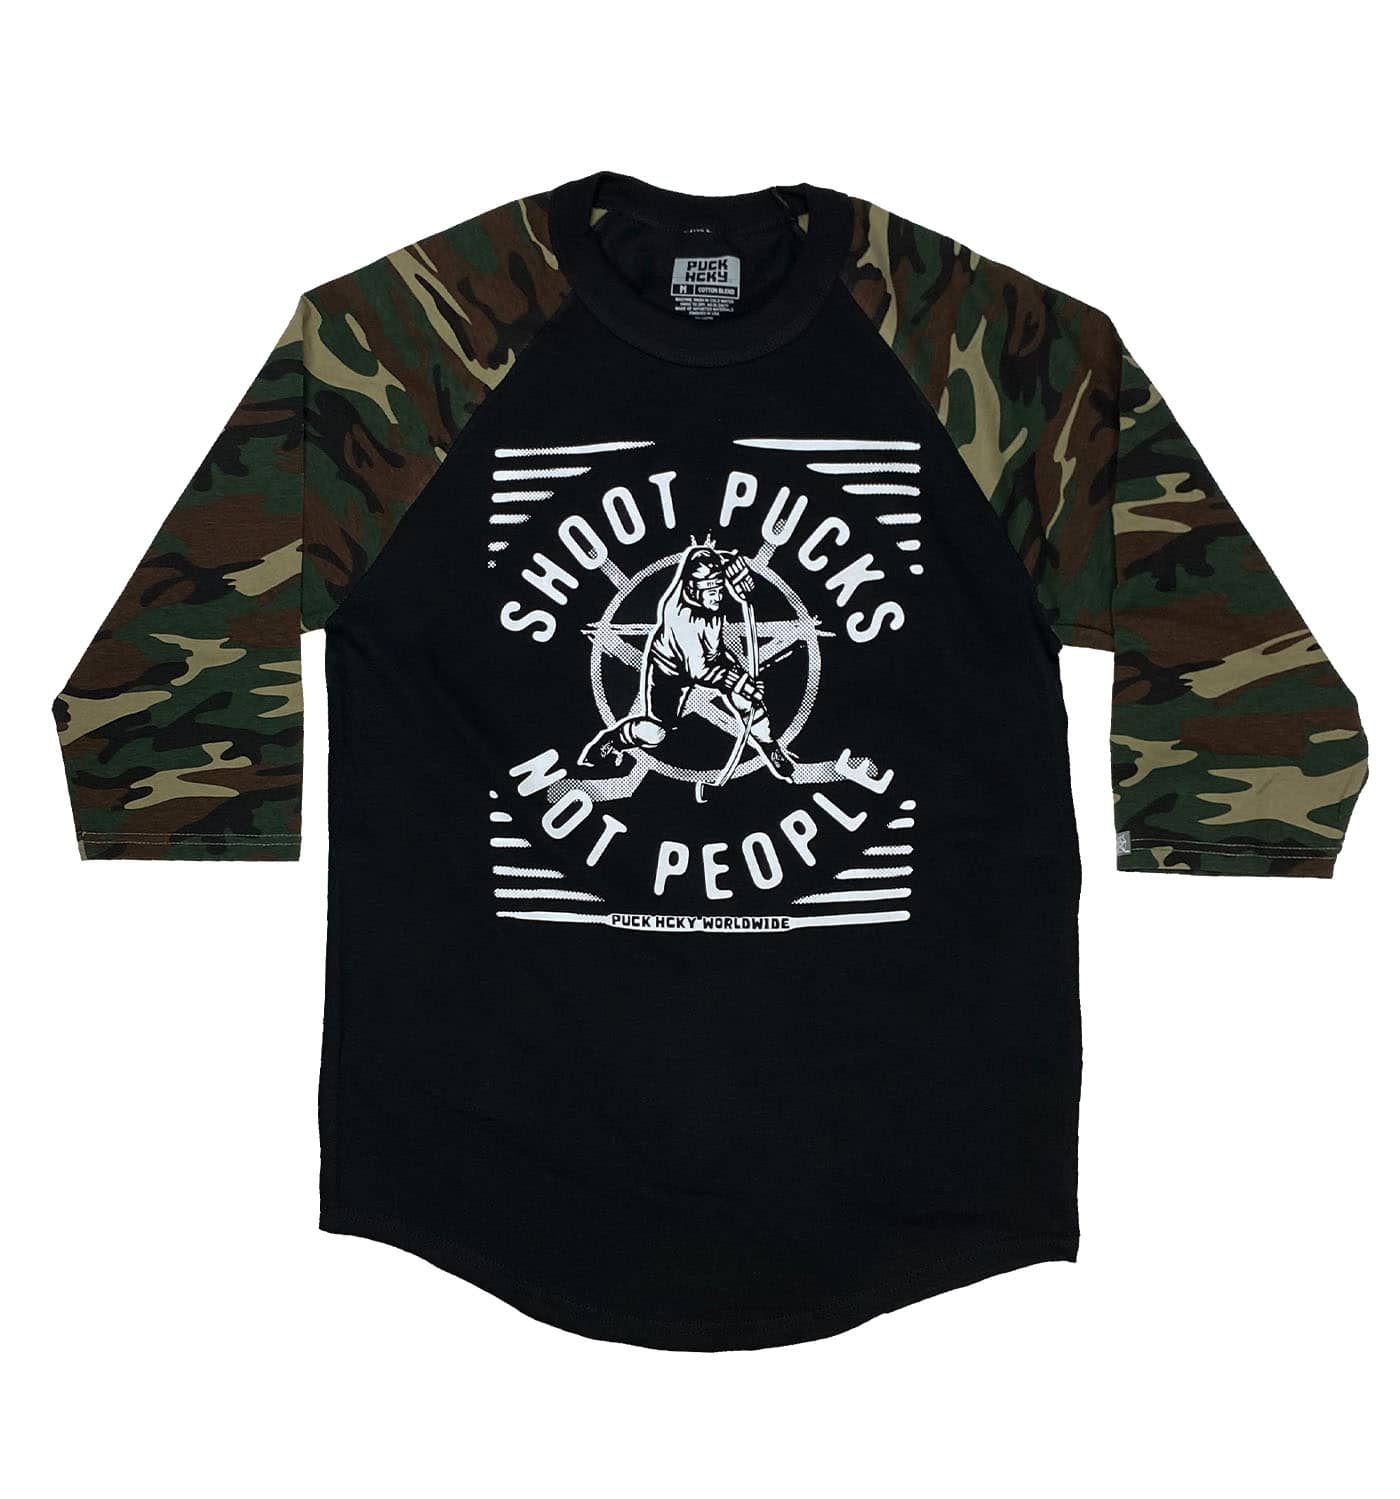 PUCK HCKY 'SHOOT PUCKS NOT PEOPLE - THE BIG SKATE' hockey raglan in black with green camo sleeves front view